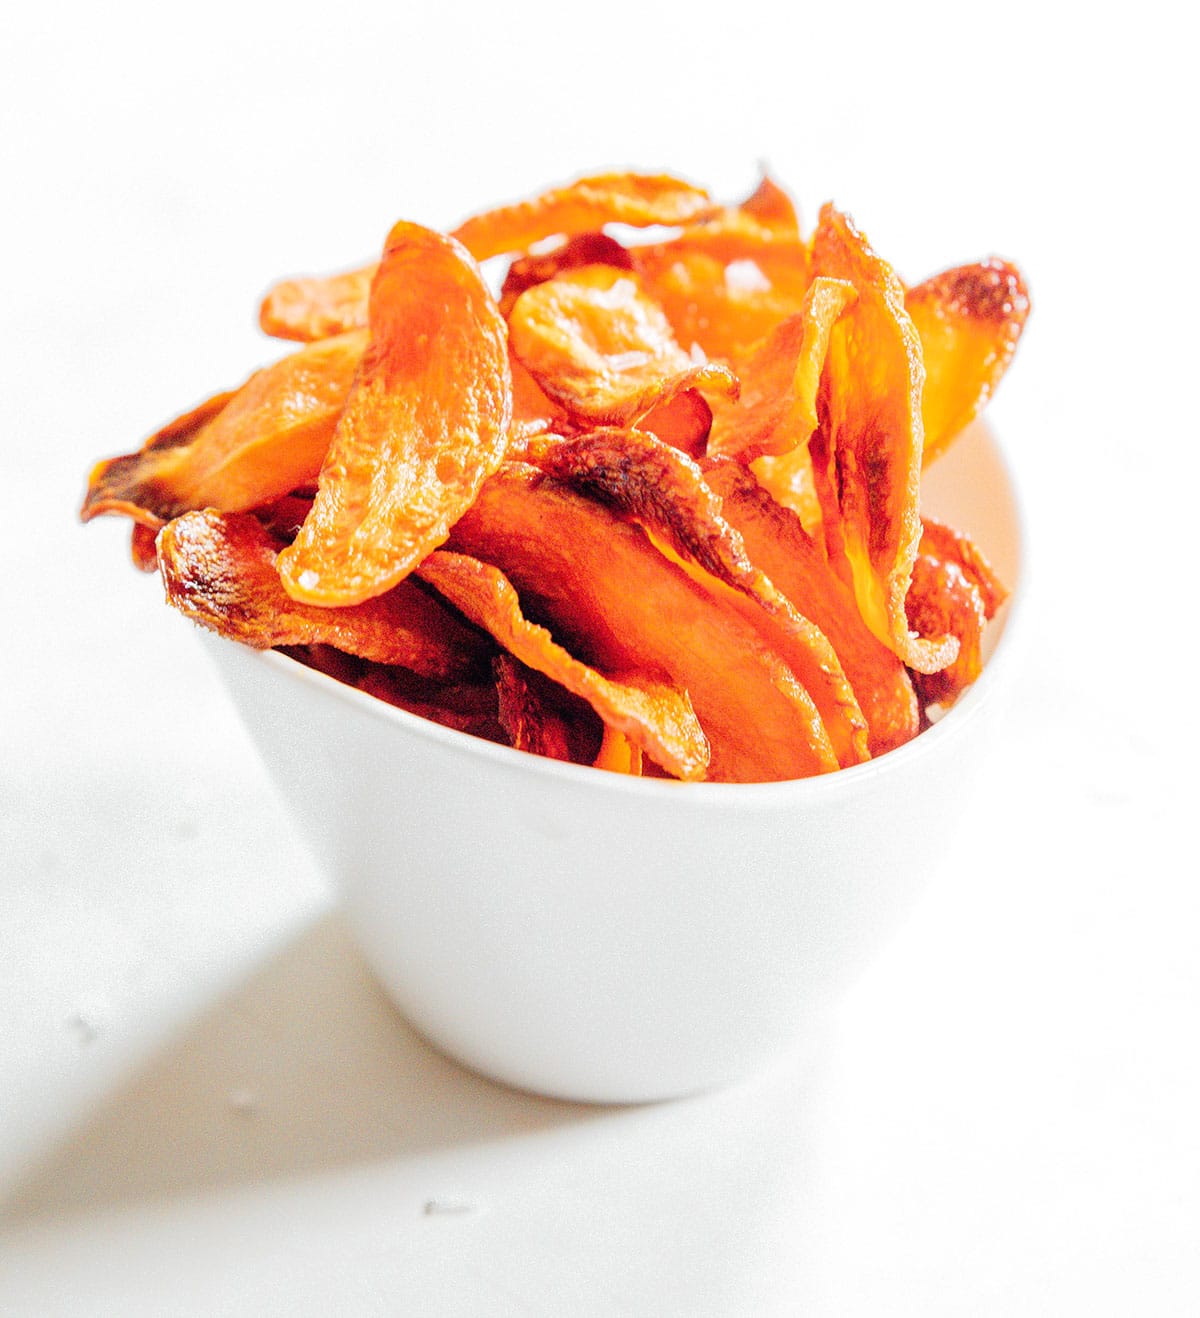 Carrot chips with flaky sea salt in a white cup.